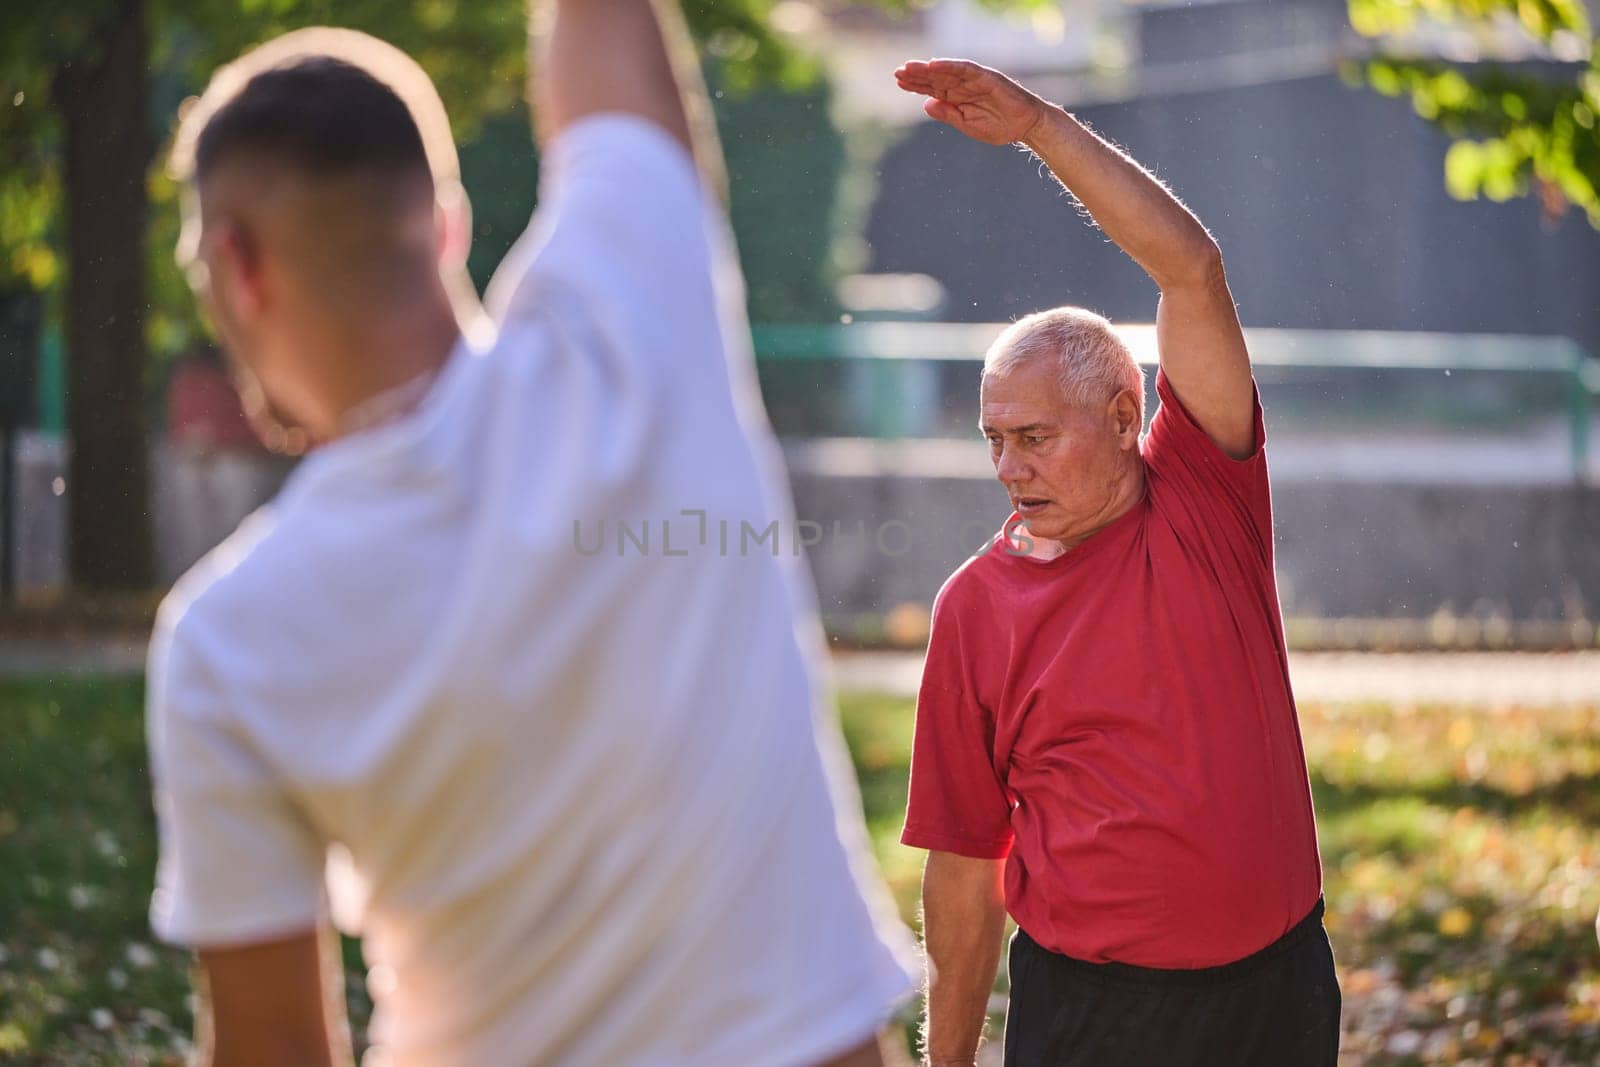 A group of seniors follows a trainer, engaging in outdoor exercises in the park, as they collectively strive to maintain vitality and well-being, embracing an active and health-conscious lifestyle in their later years.